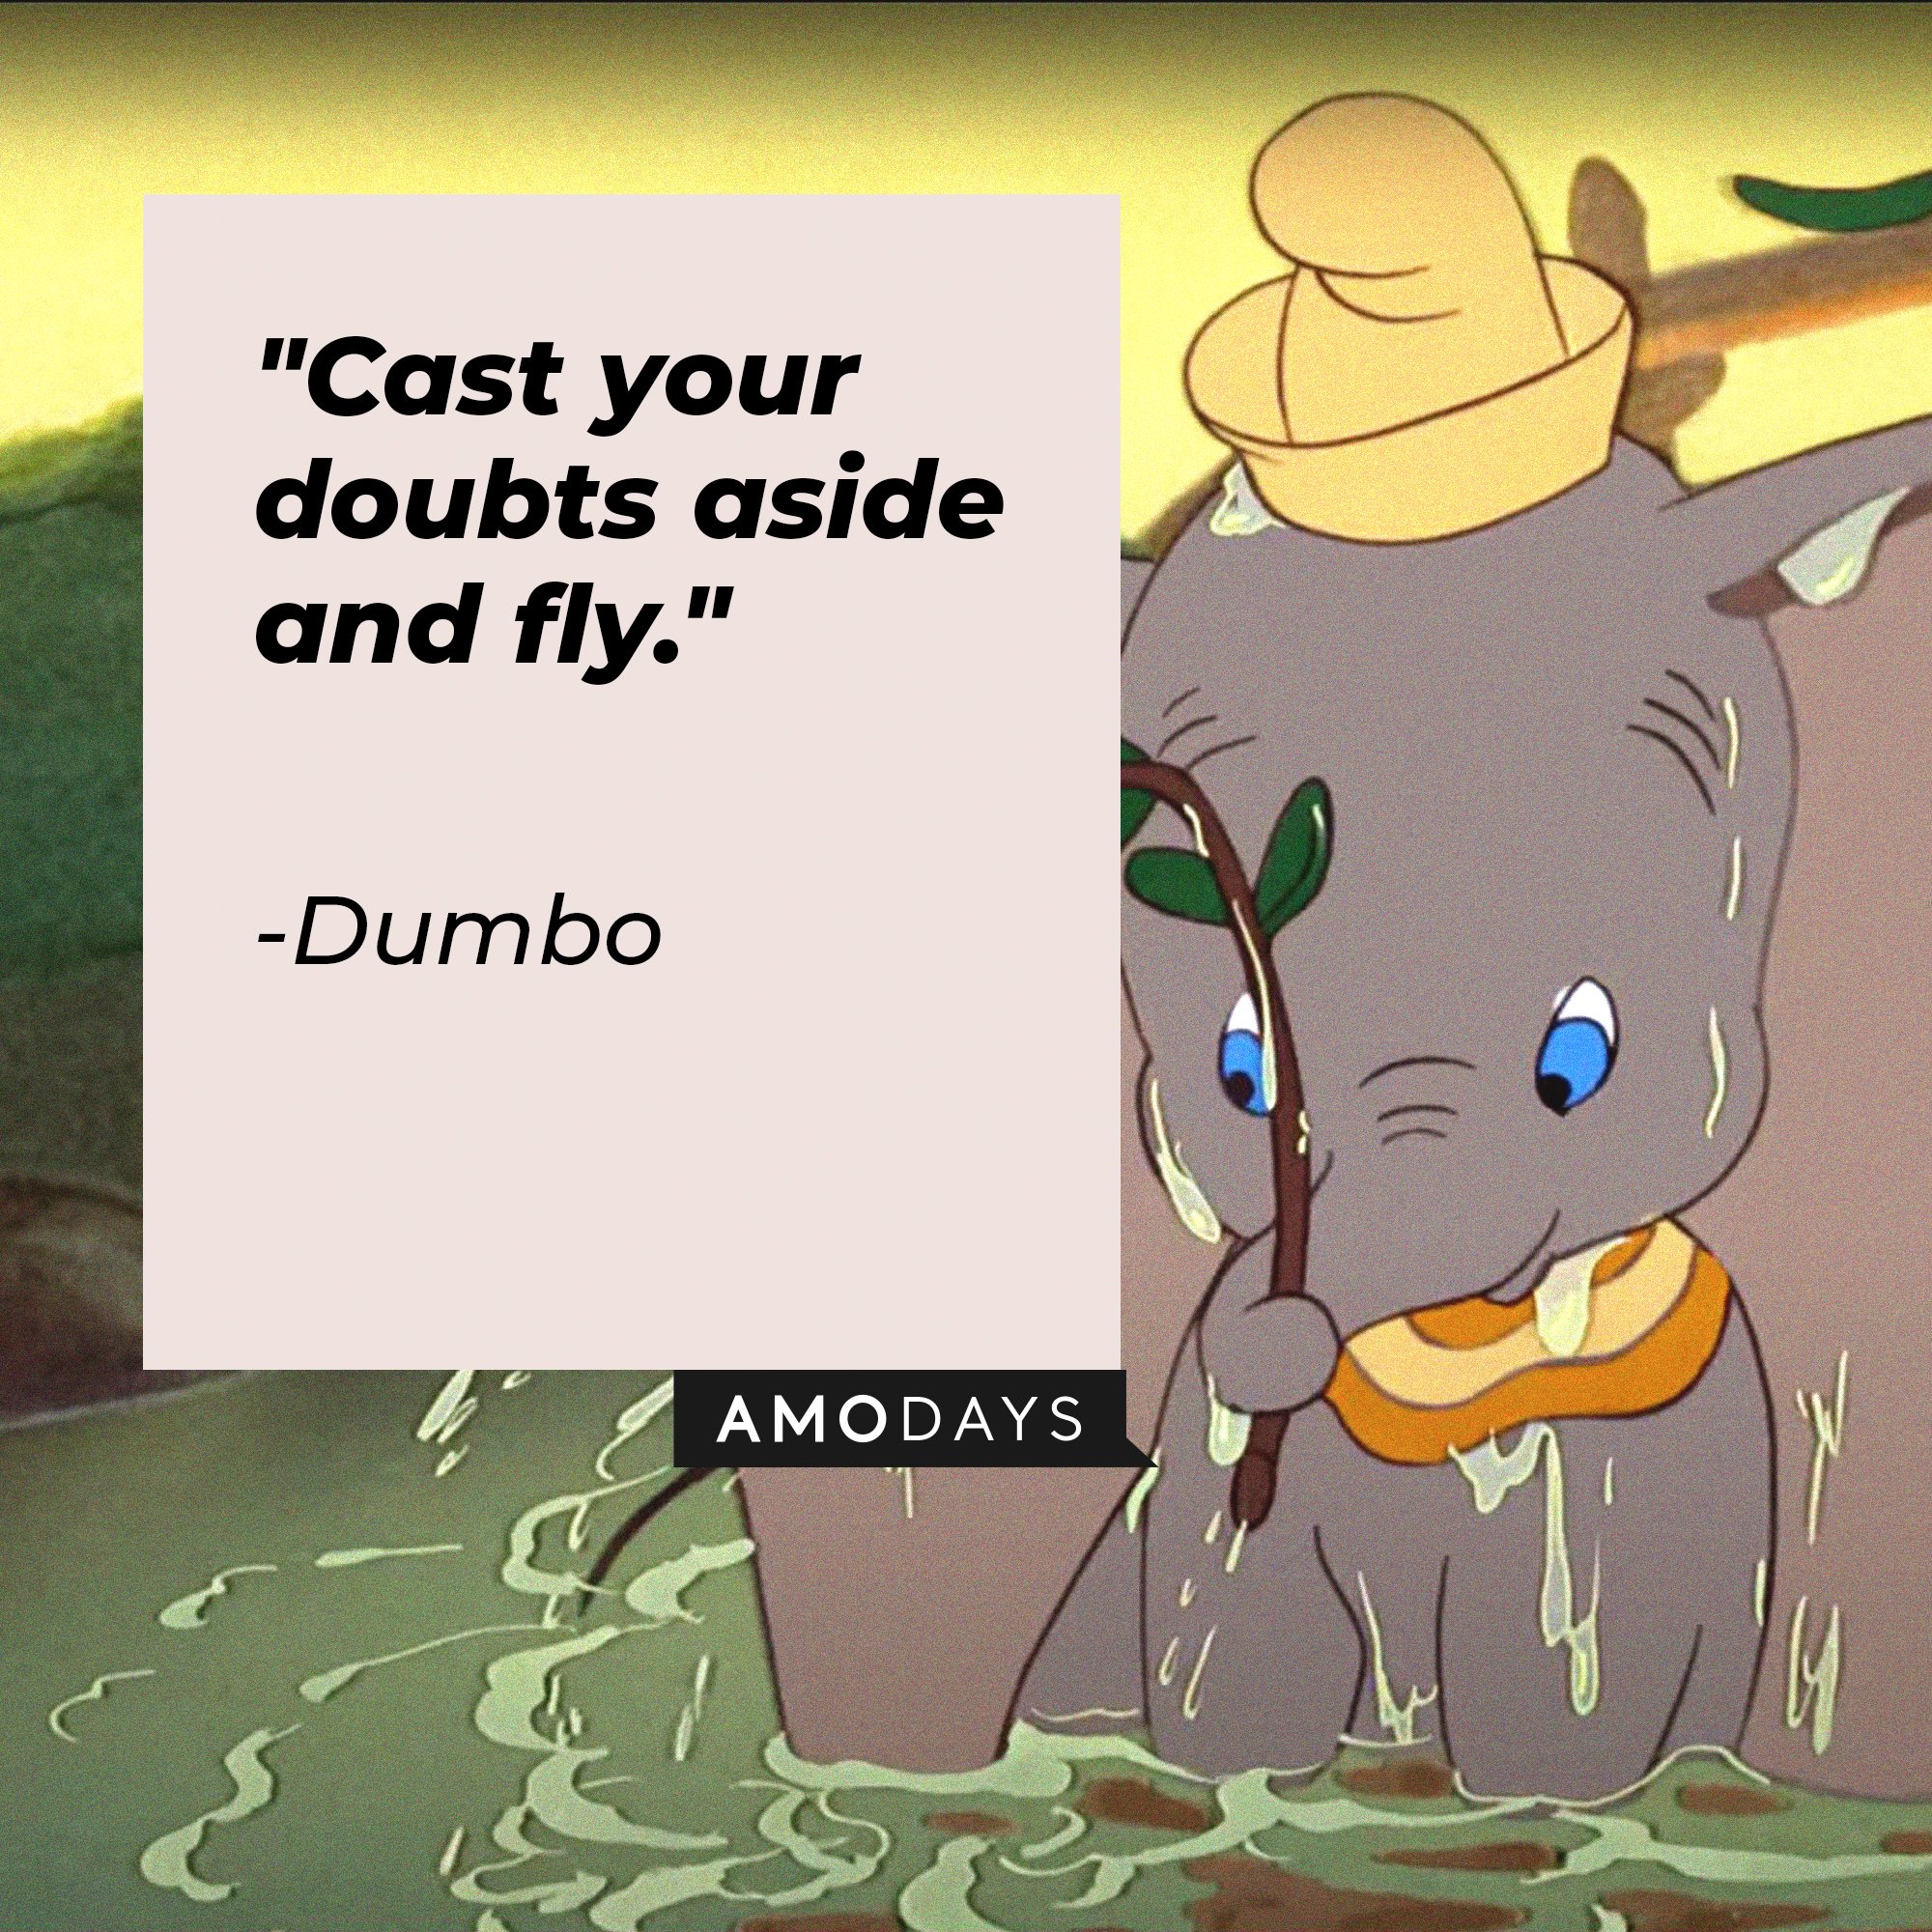 Dumbo’s quote: "Cast your doubts aside and fly." | Image: AmoDays   